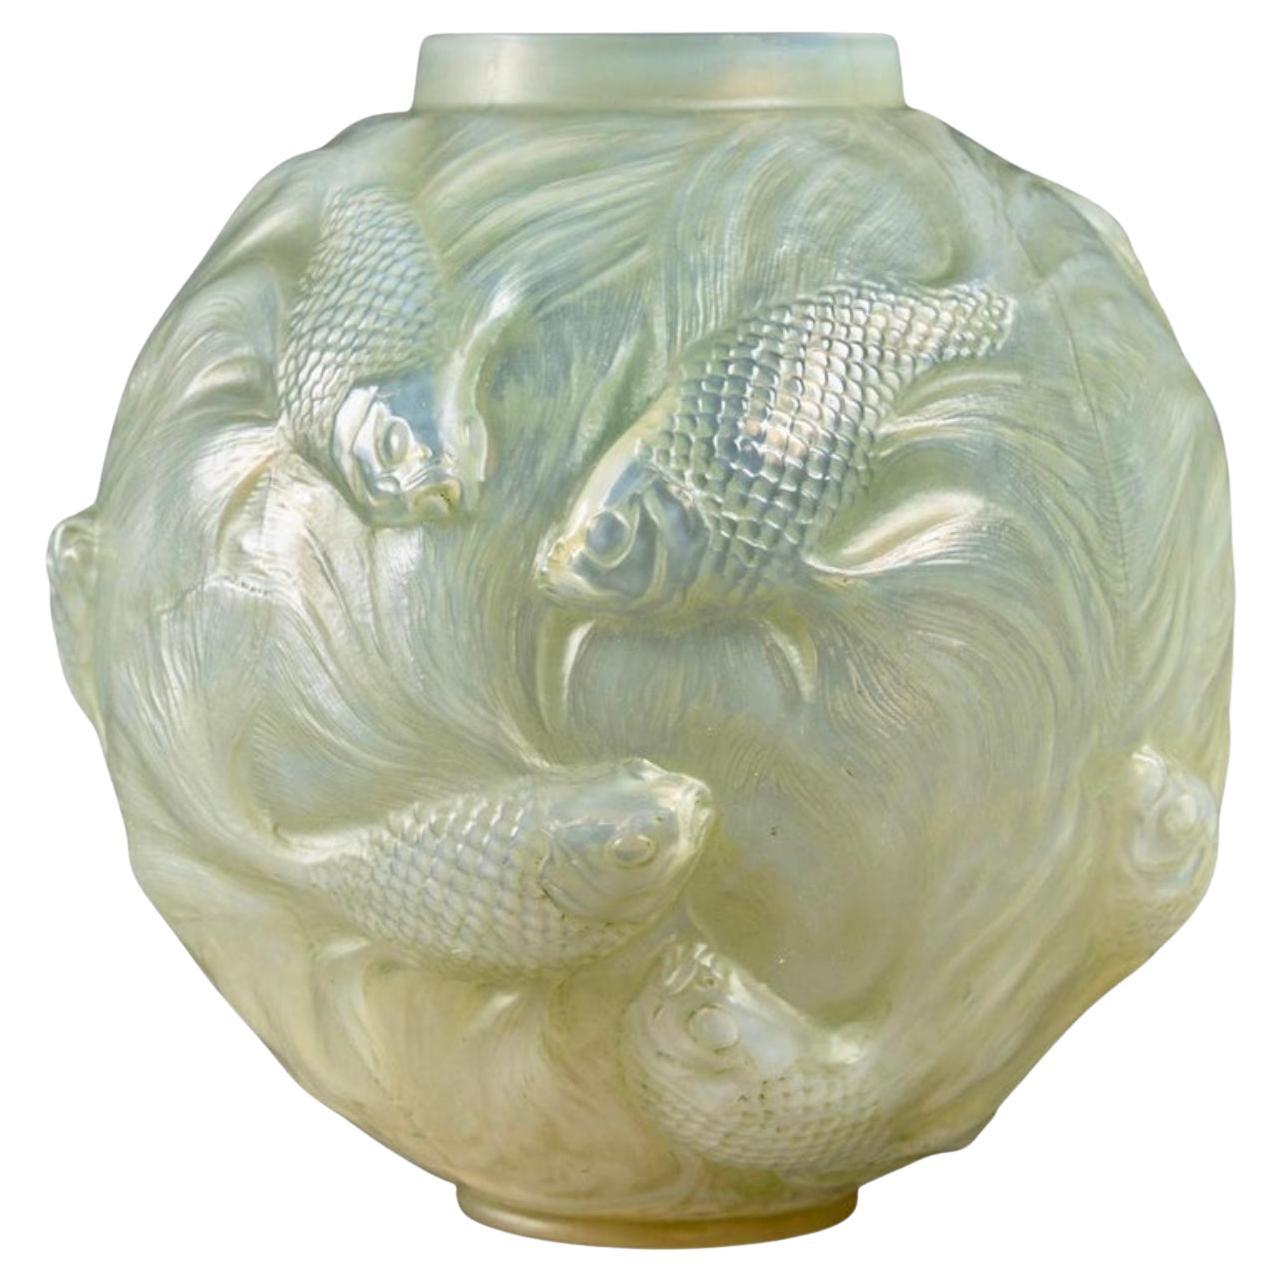 1924 Rene Lalique Vase Formose Cased Opalescent Glass with Lime Green Patina